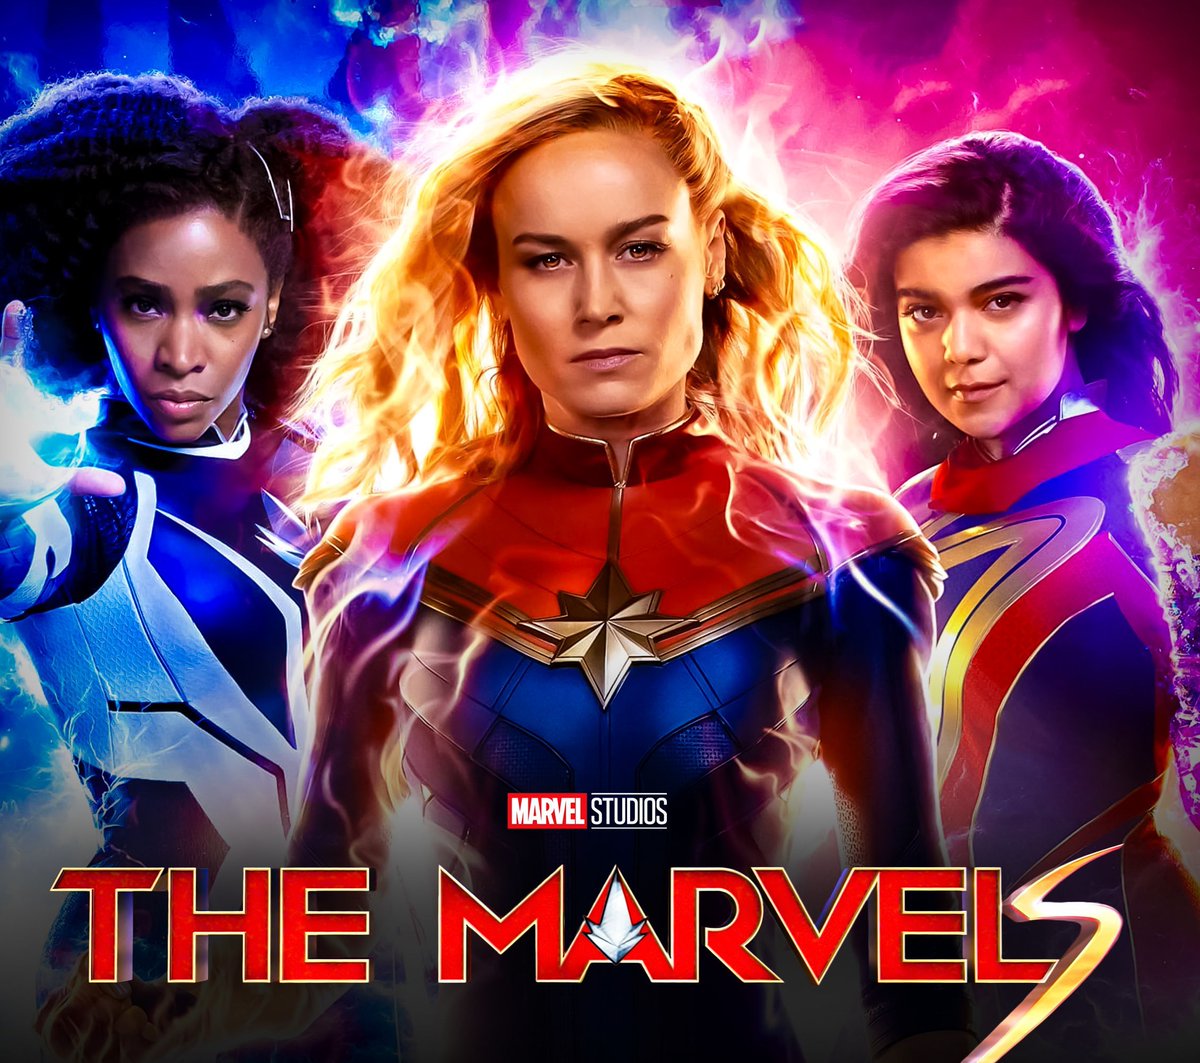 THE MARVELS reportedly lost Disney an estimated $237 million, becoming the biggest box office bomb of 2023... Comparison numbers & details: thedirect.com/article/disney…